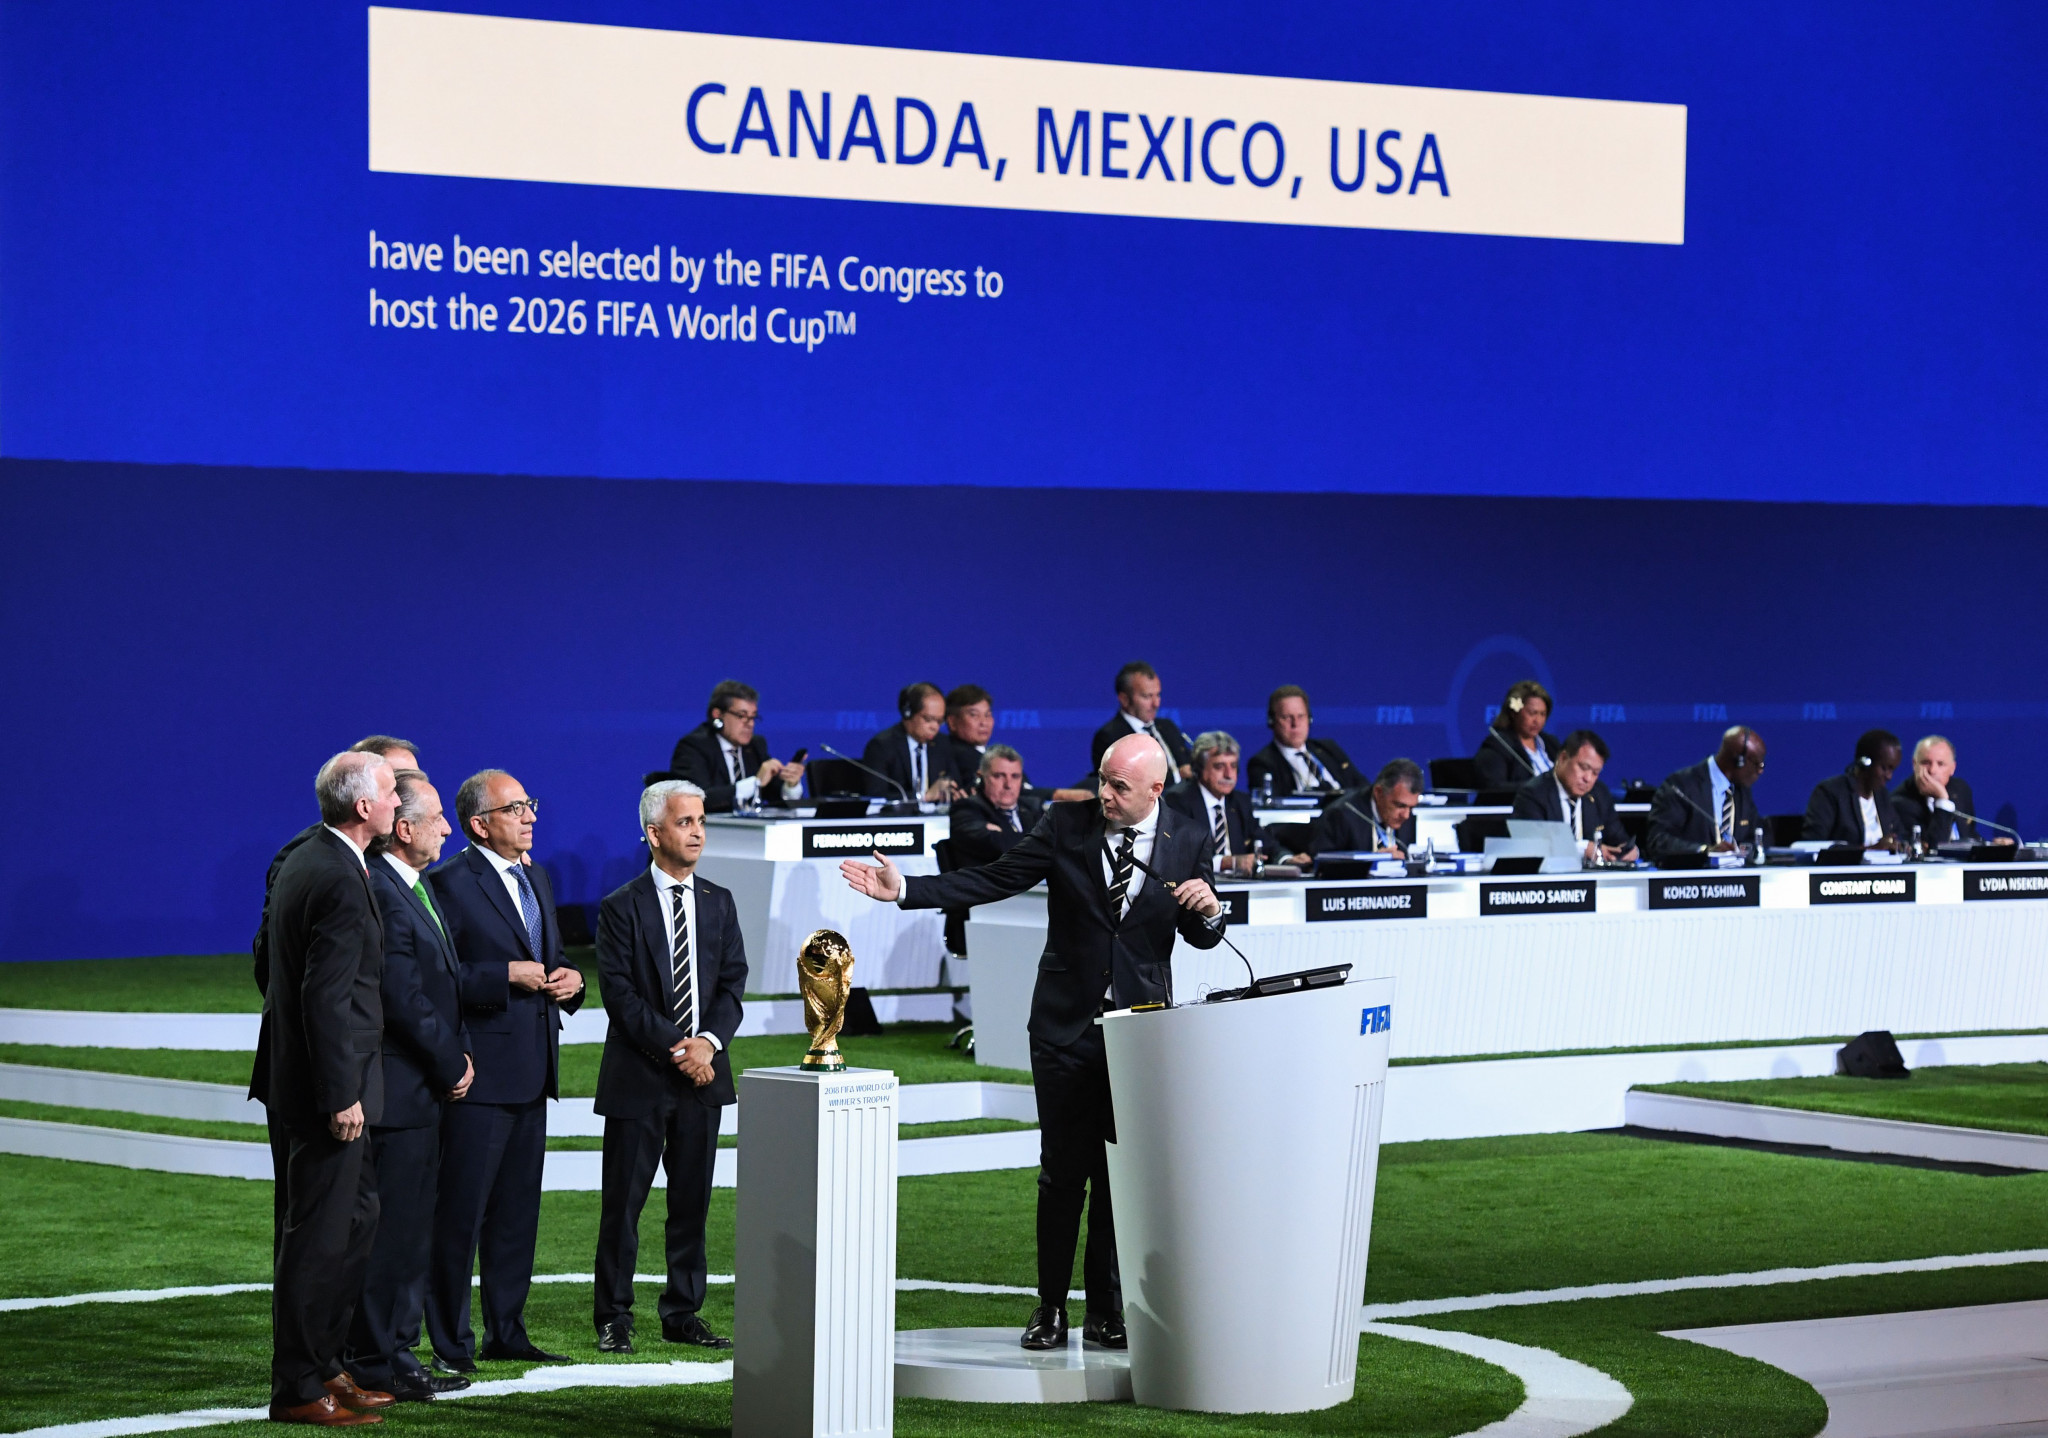 Victor Montagliani was involved in the successful North American bid for the 2026 FIFA World Cup ©Getty Images